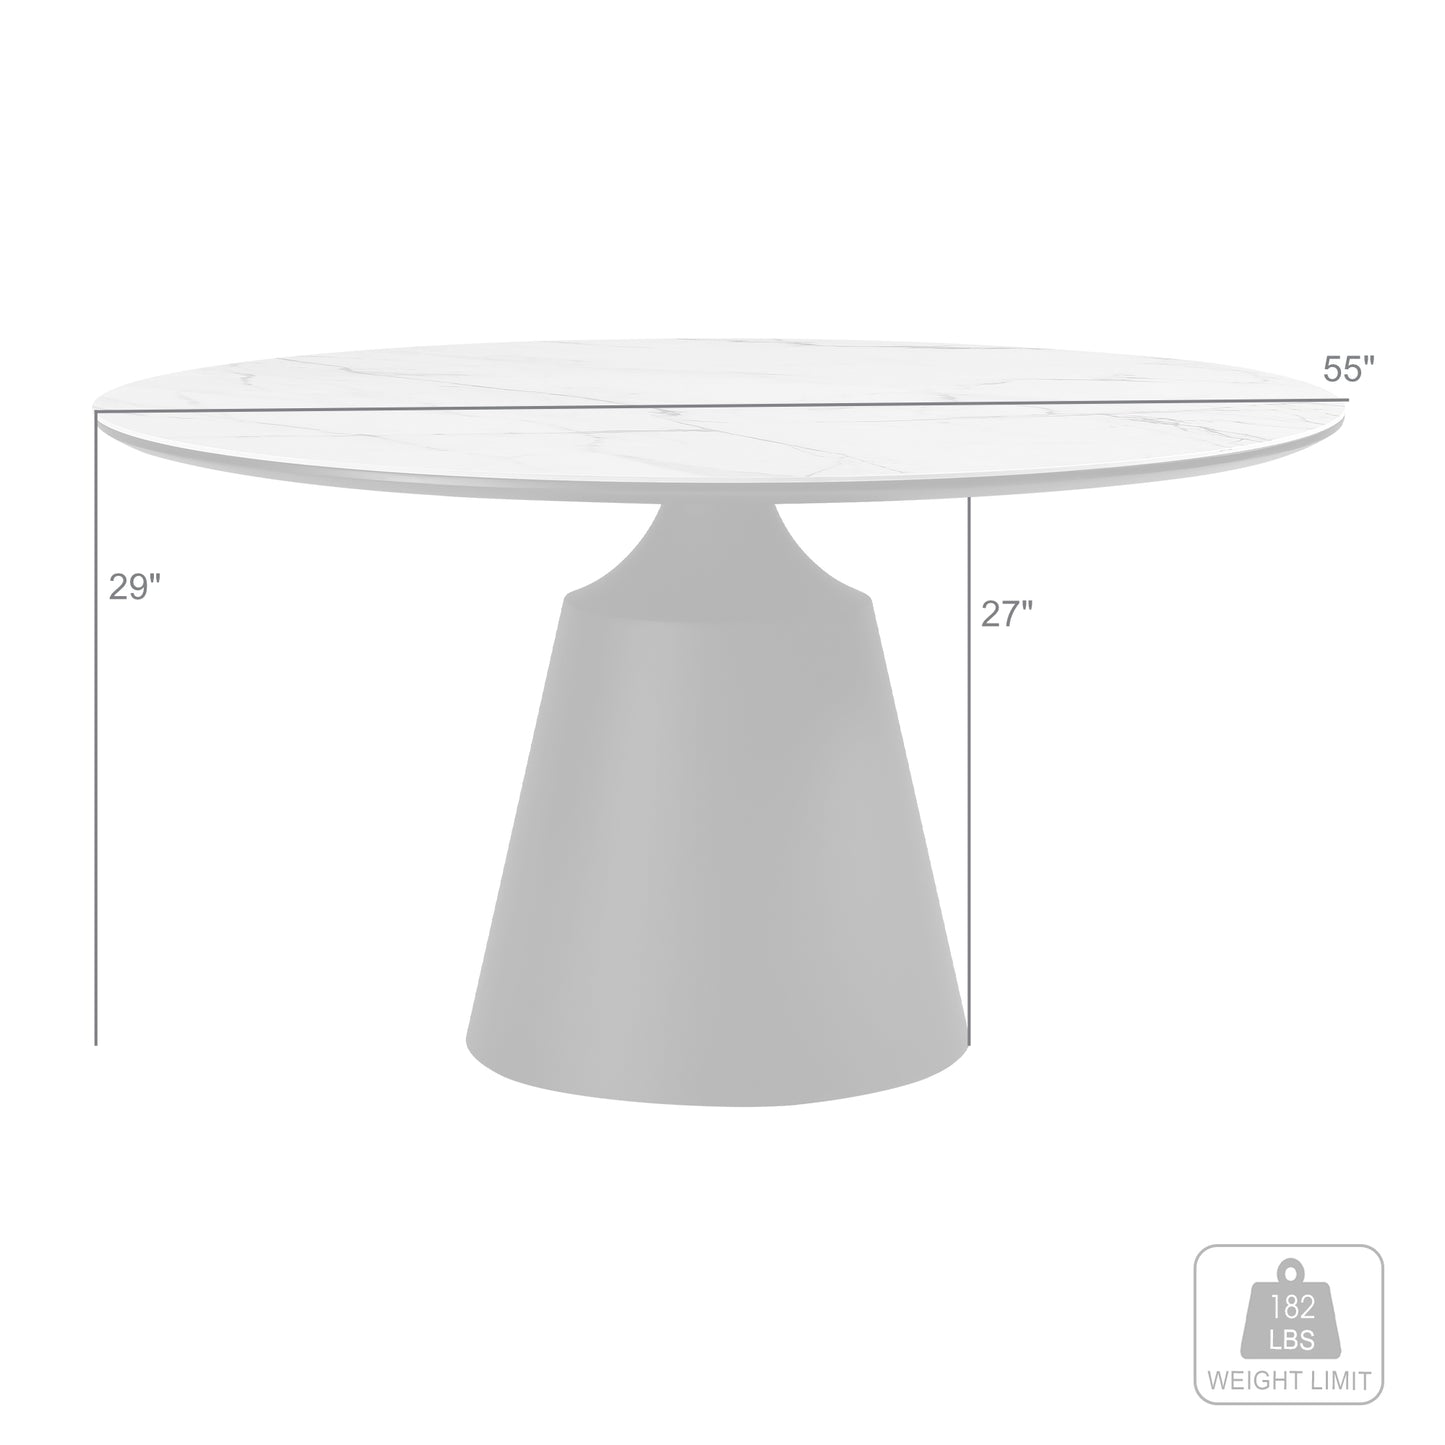 Knox Round Dining Table with Stone Top and Black Metal Base